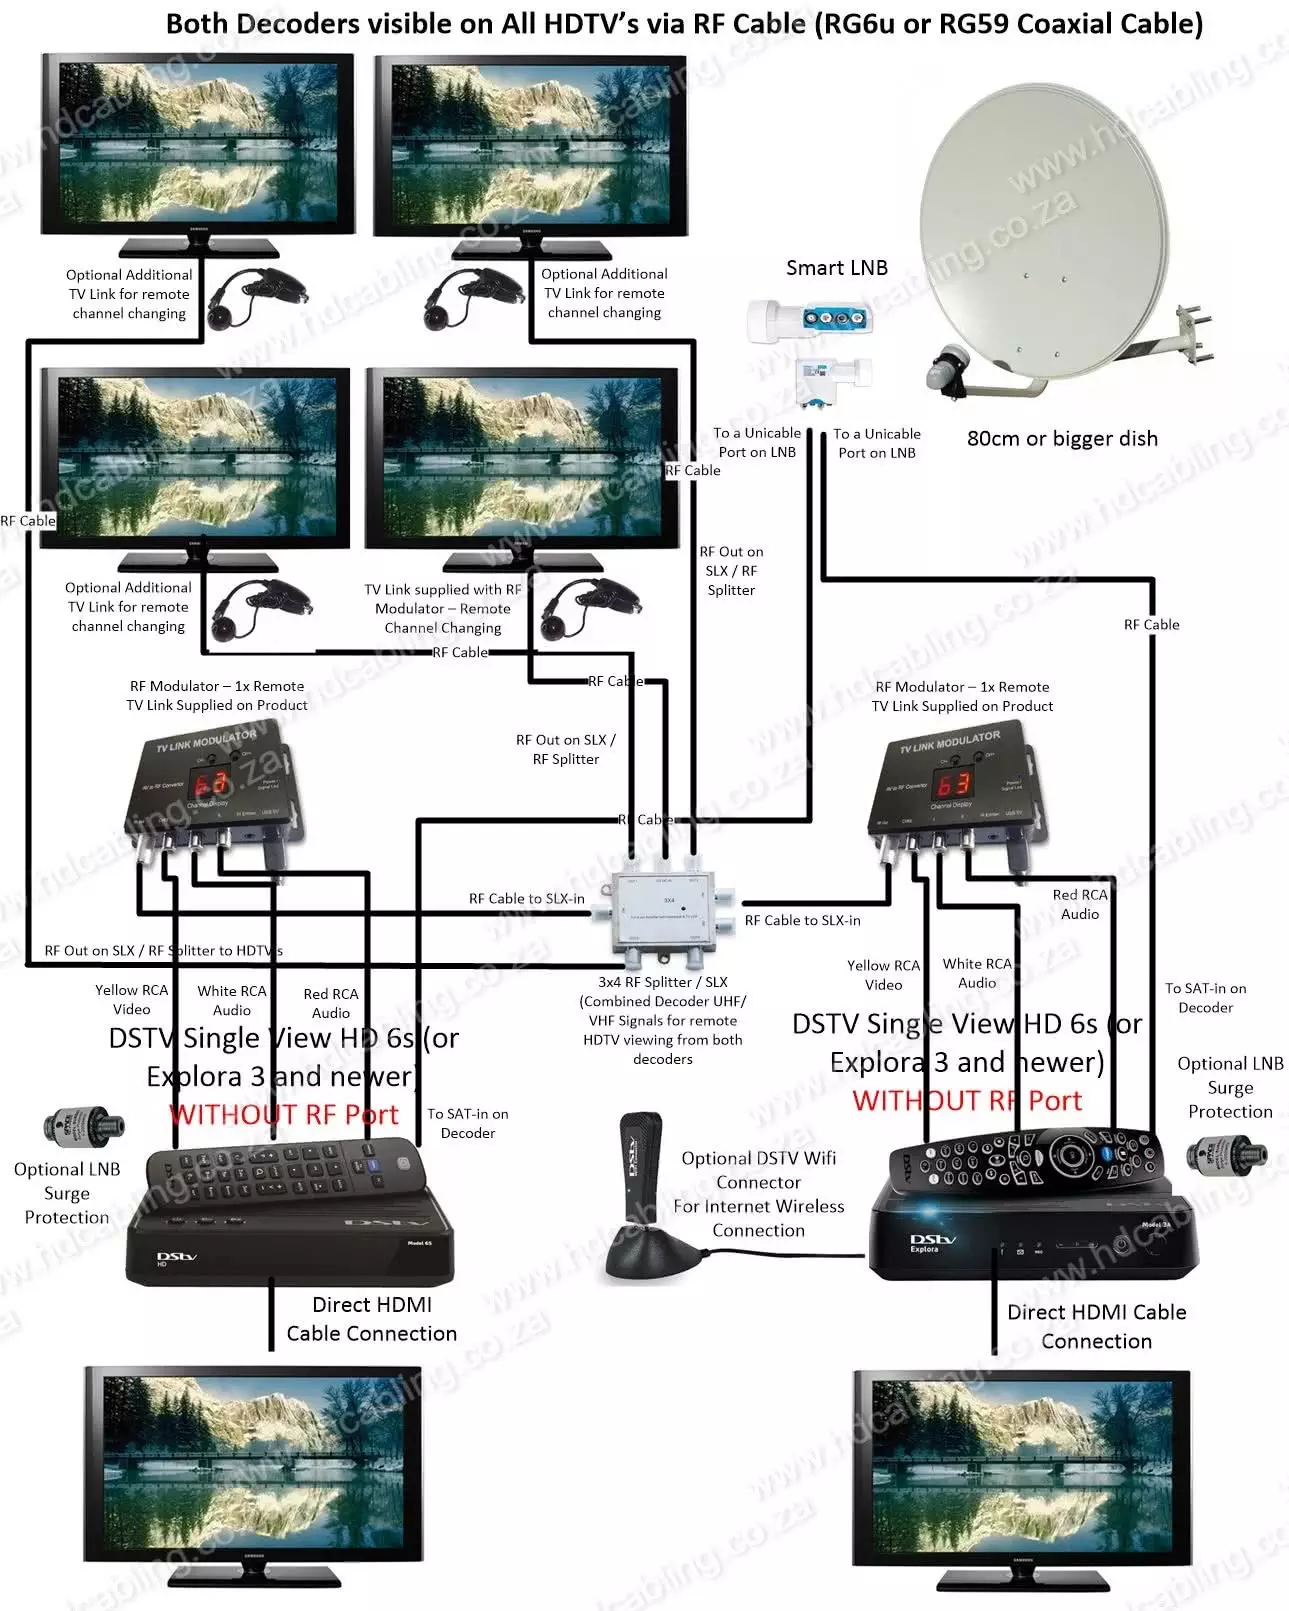 DSTV XtraView Installation & Frequencies (DSTV User Bands) for Multichoice Explora/HDPVR and other decoders